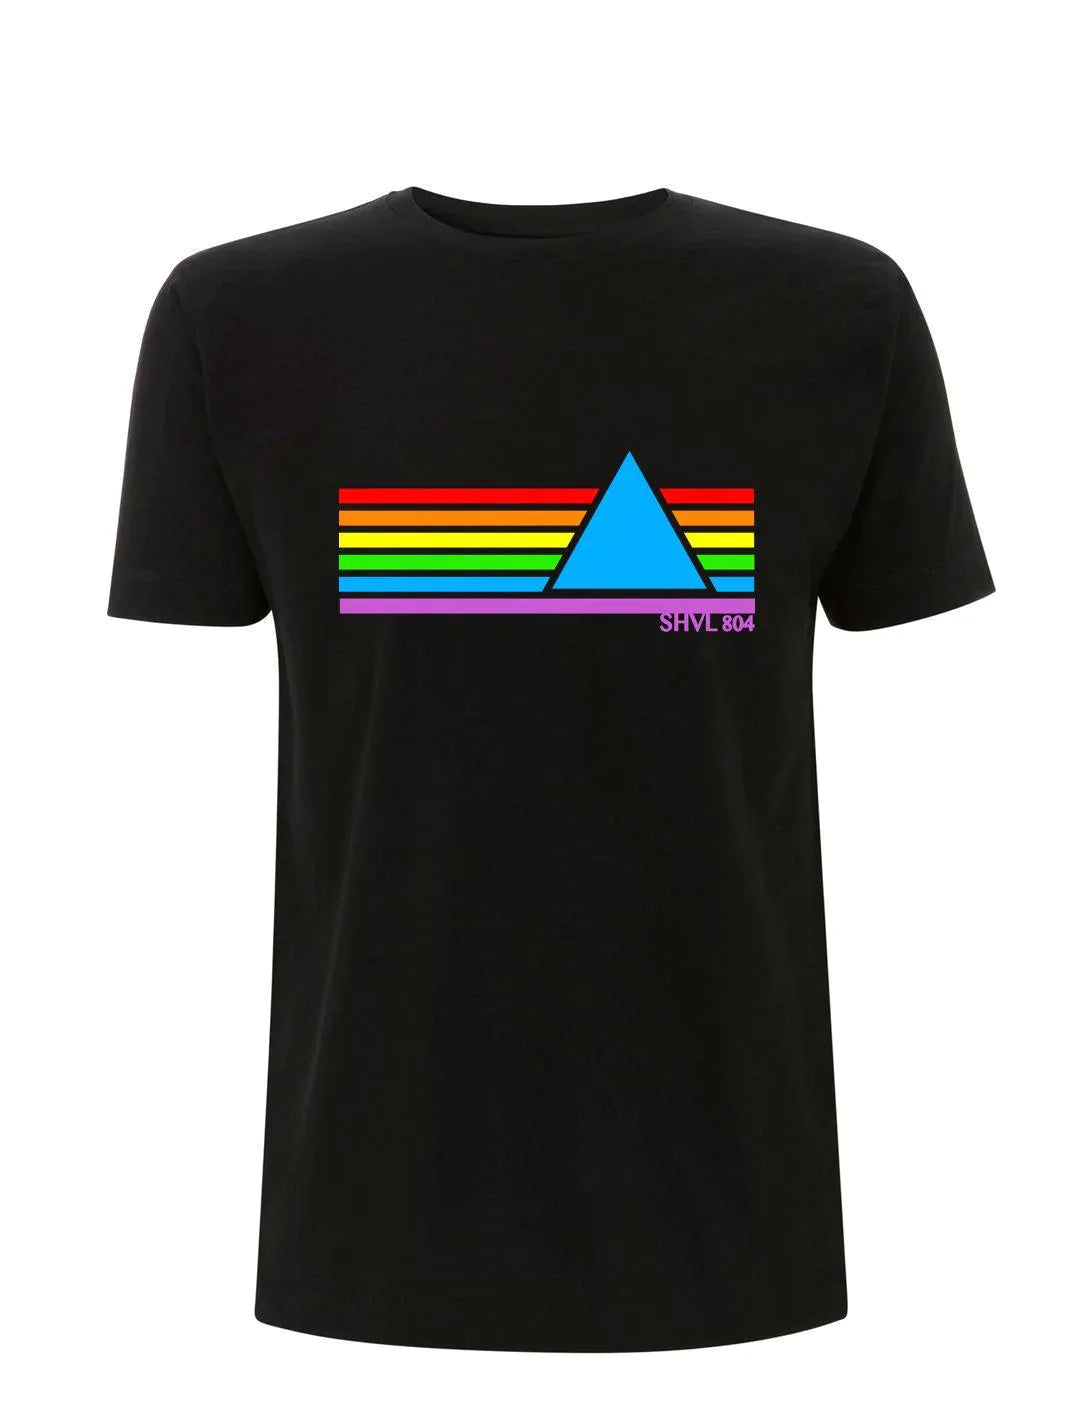 SVHL 804: T-Shirt Inspired by Pink Floyd and Dark Side of The Moon - SOUND IS COLOUR